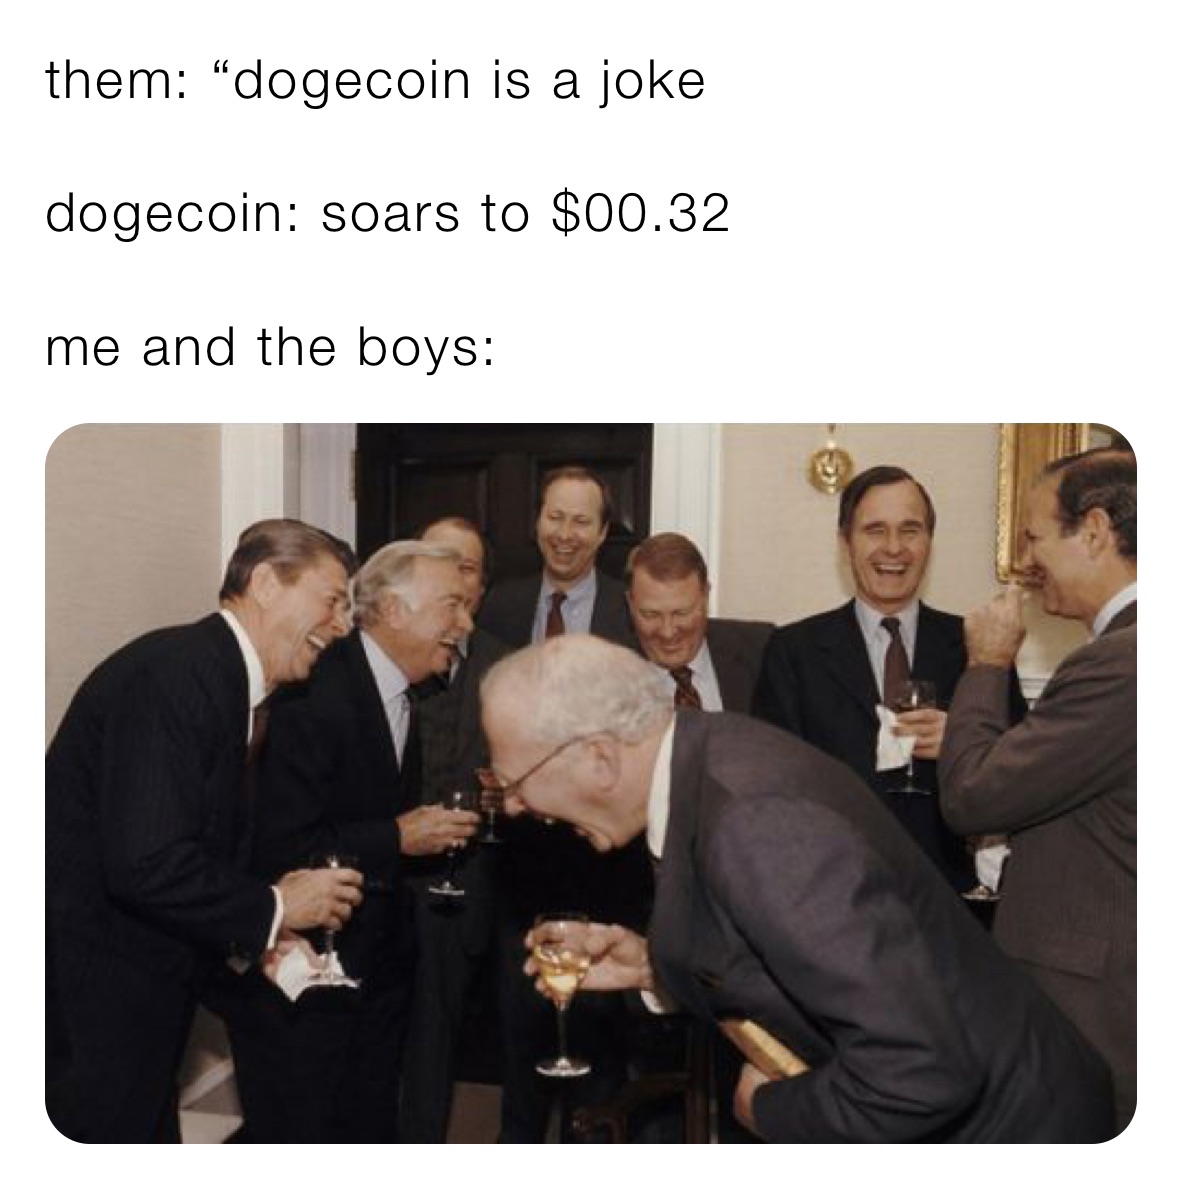 them: “dogecoin is a joke

dogecoin: soars to $00.32

me and the boys: